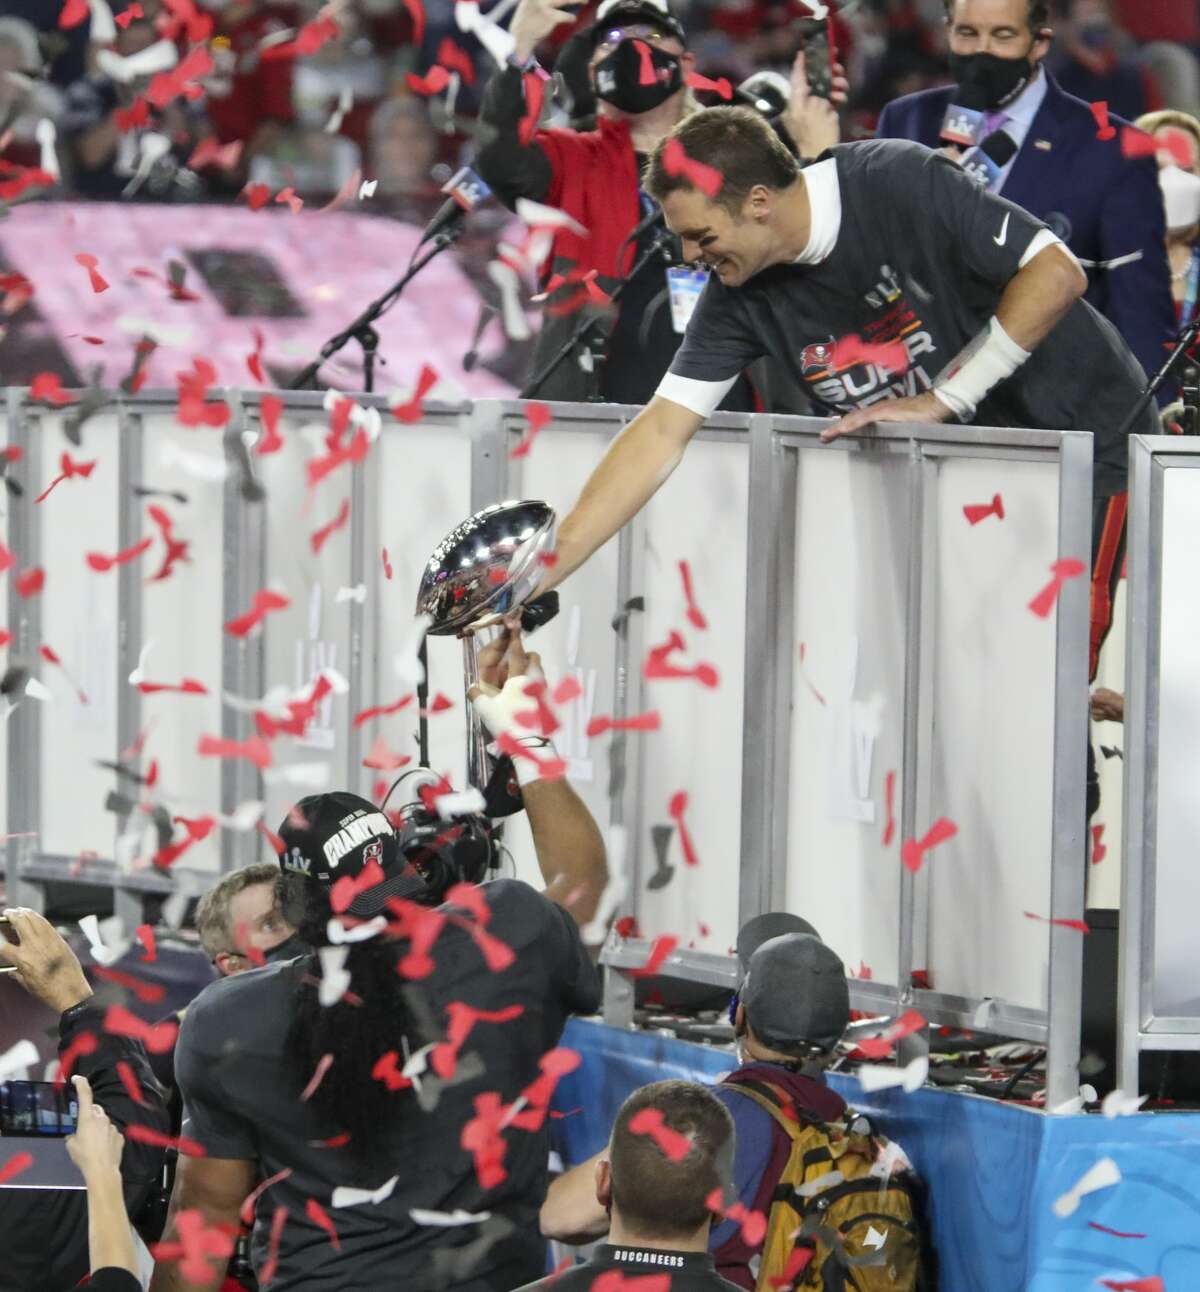 Tampa Bay Buccaneers quarterback Tom Brady (12) hands the Lombardi Trophy to Tampa Bay Buccaneers nose tackle Vita Vea (50) while they celebrate the Buccaneers' 31-9 win over the Kansas City Chiefs in Super Bowl LV Sunday, February 7, 2021 in Tampa, Florida. 